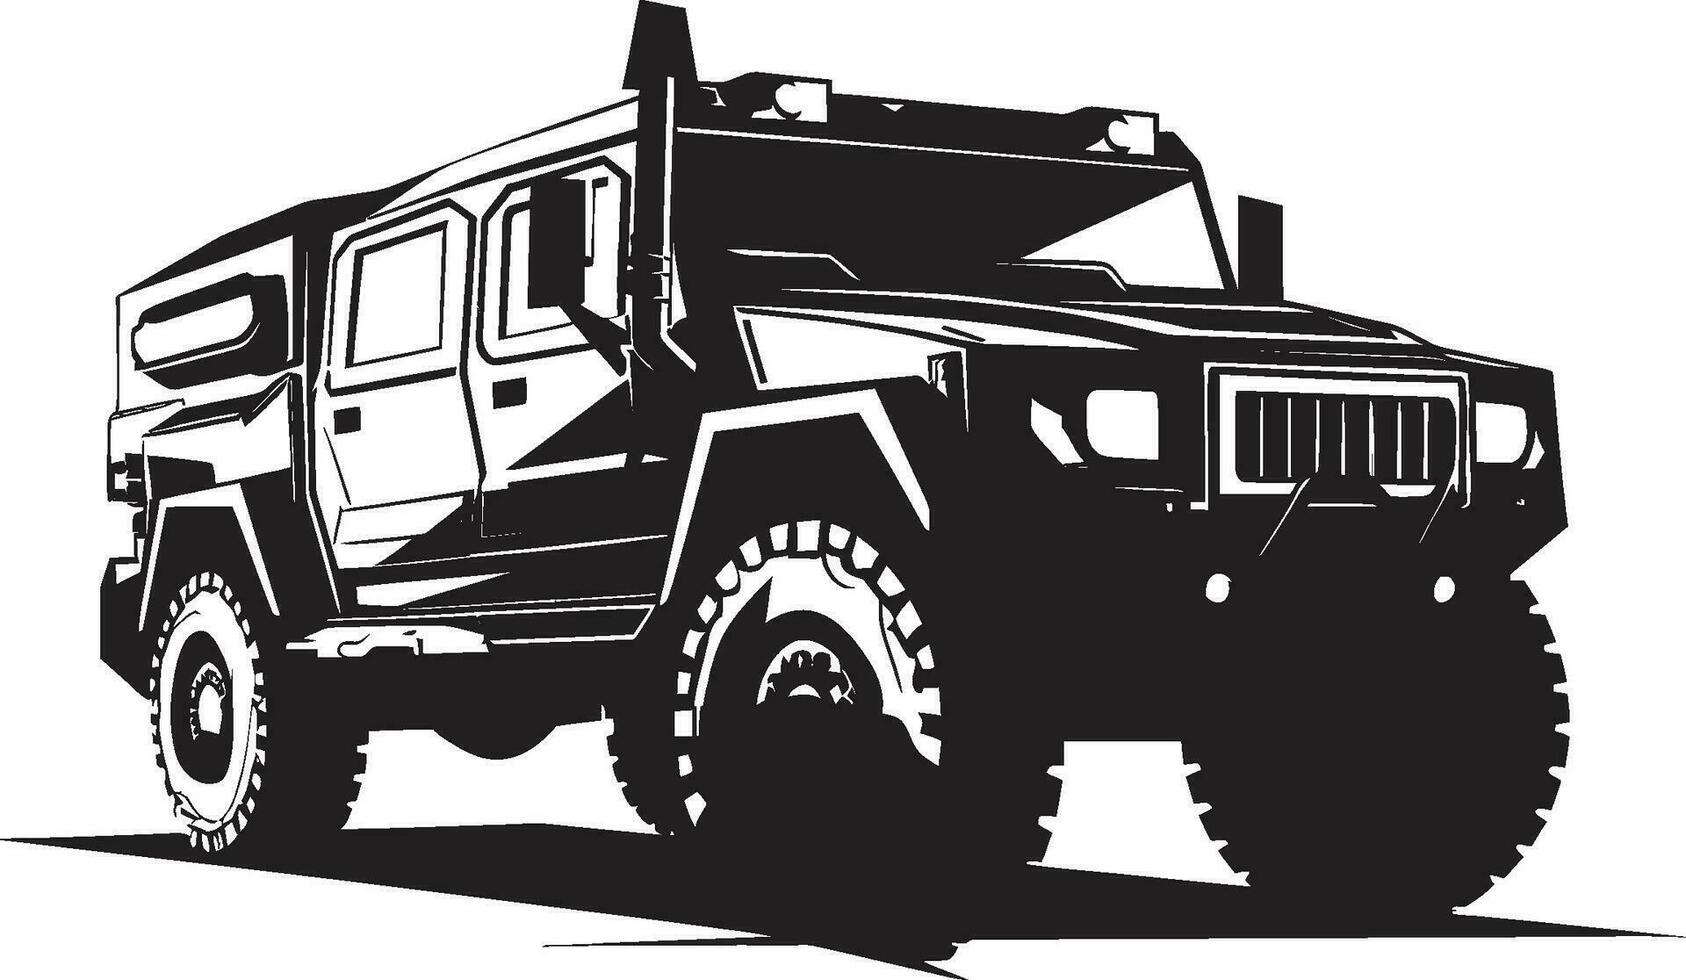 Defensive Expedition Military Vehicle Icon Warrior s Ride Black Army 4x4 Logo vector